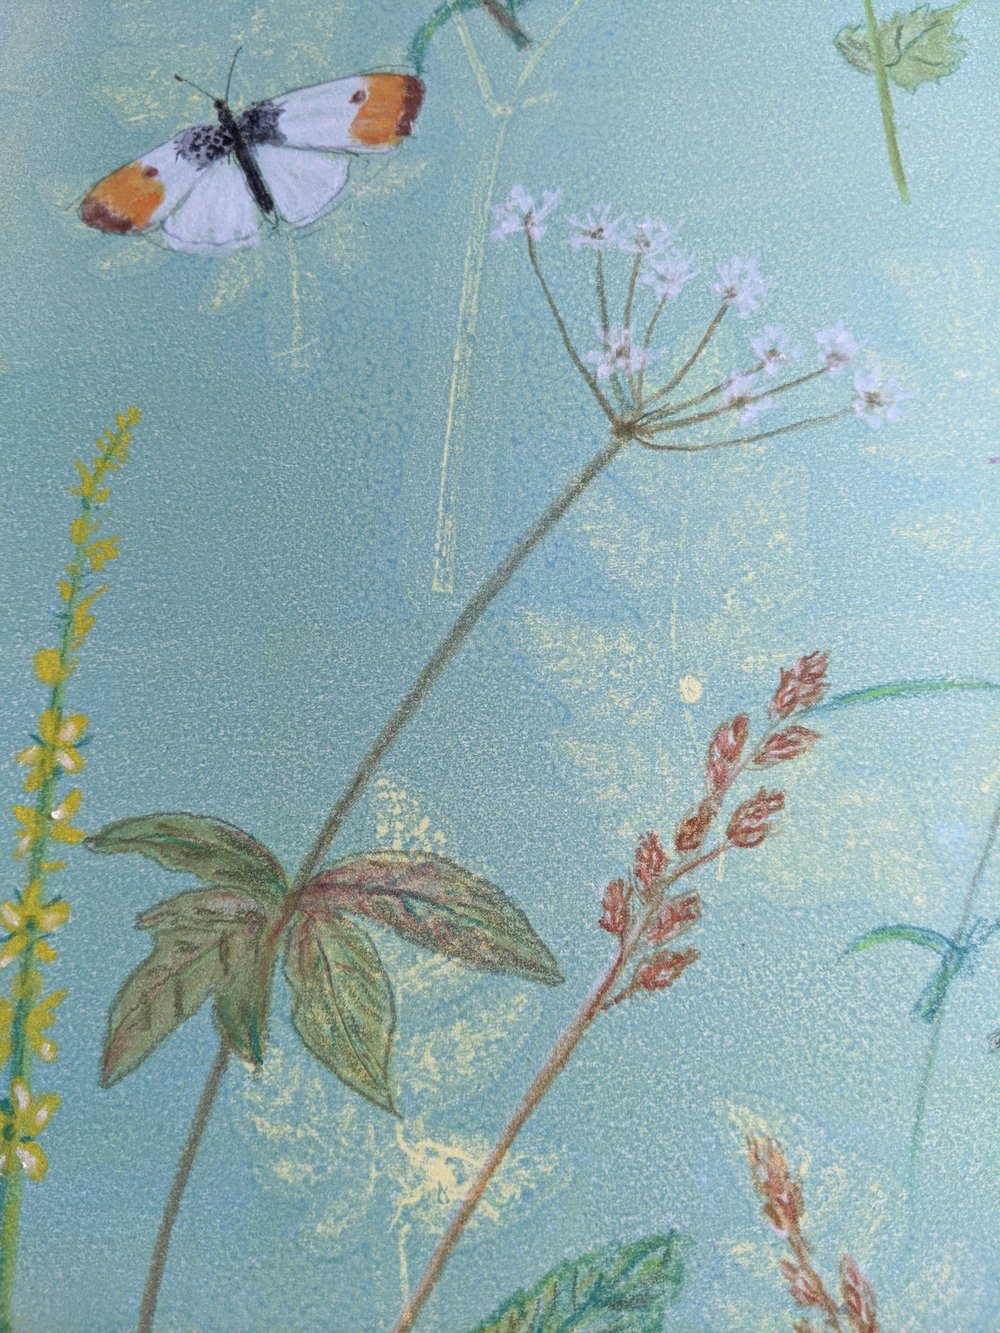 Monoprint 'bees and things and flowers' by Jill Poole.jpg